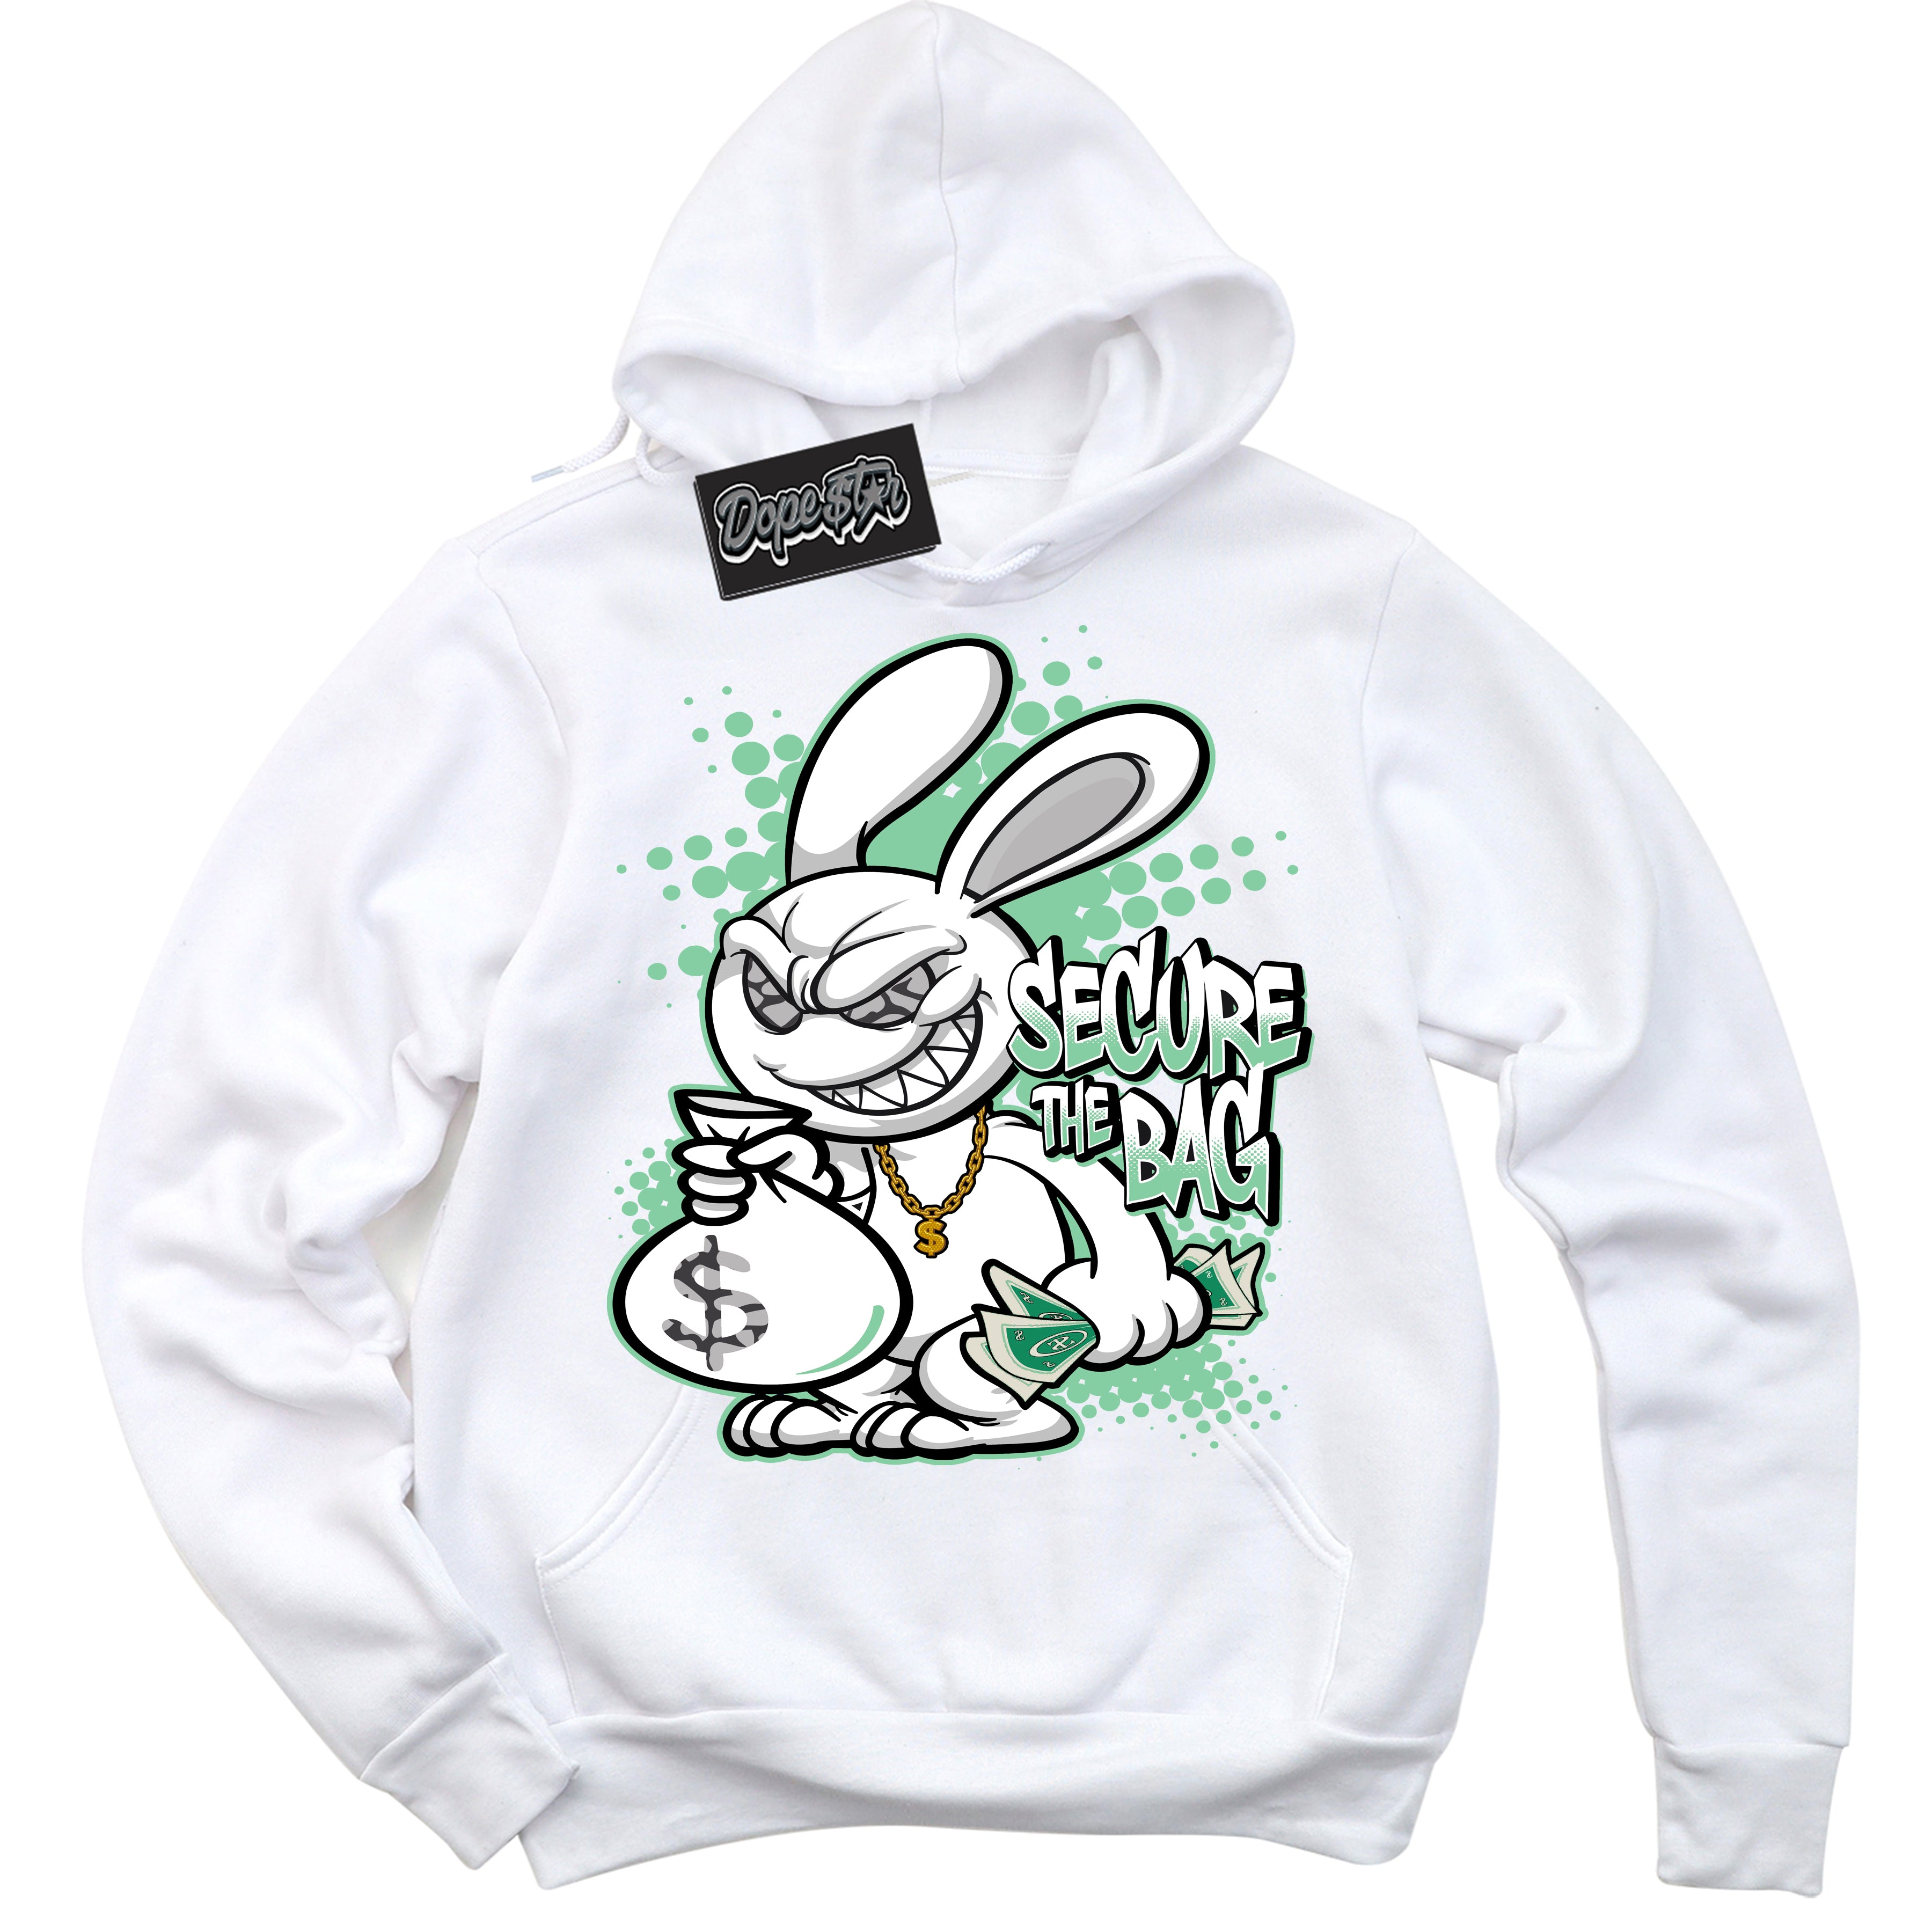 Cool White Graphic DopeStar Hoodie with “ Secure The Bag “ print, that perfectly matches Green Glow 3s sneakers